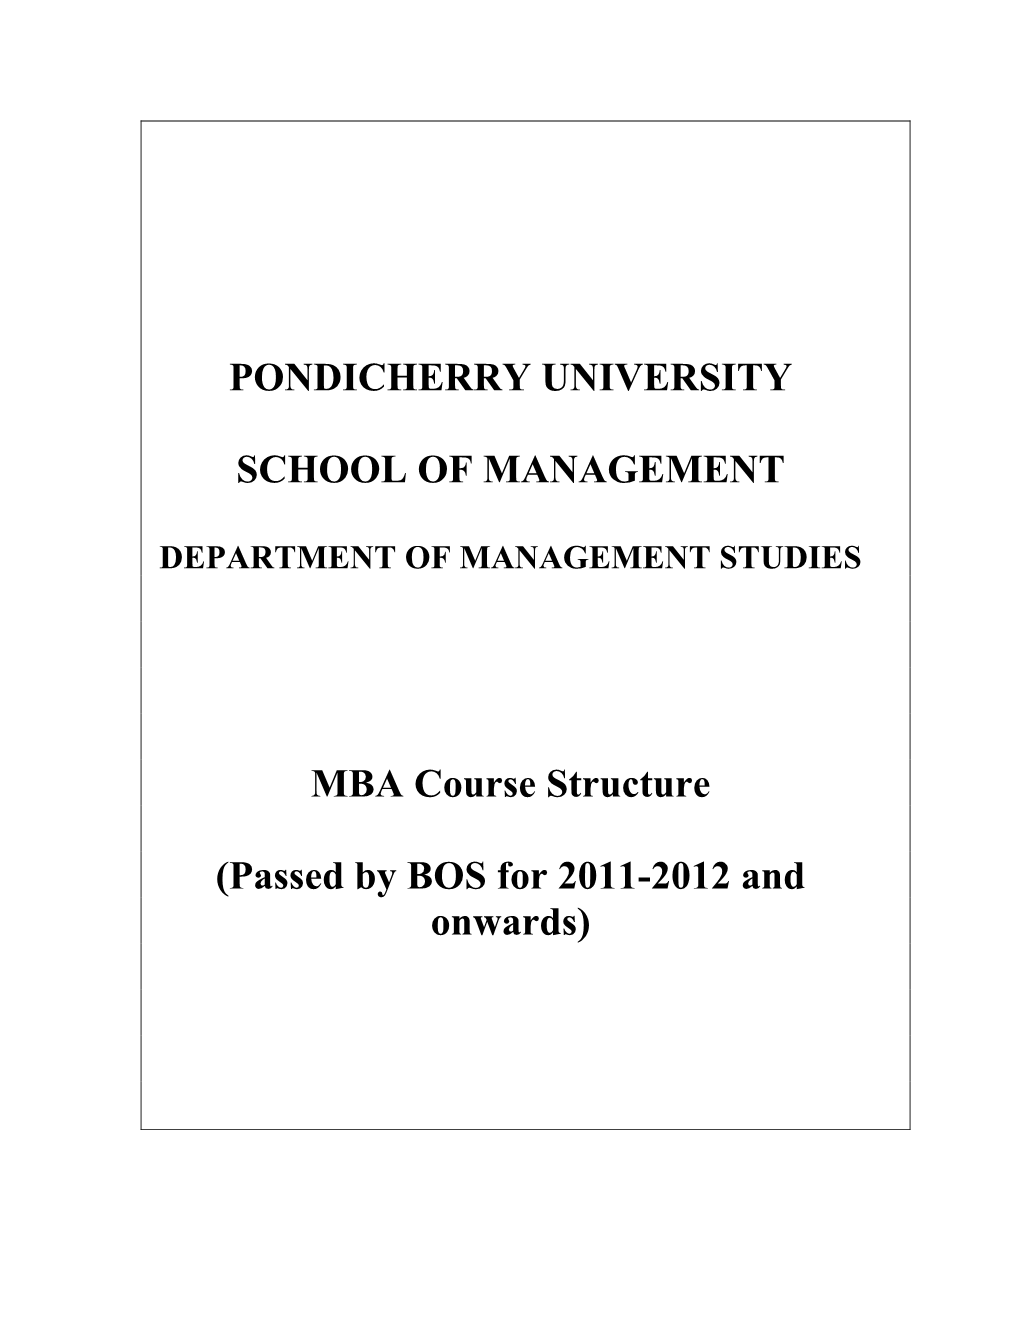 MBA Course Structure (Passed by BOS for 2011-2012 and Onwards)